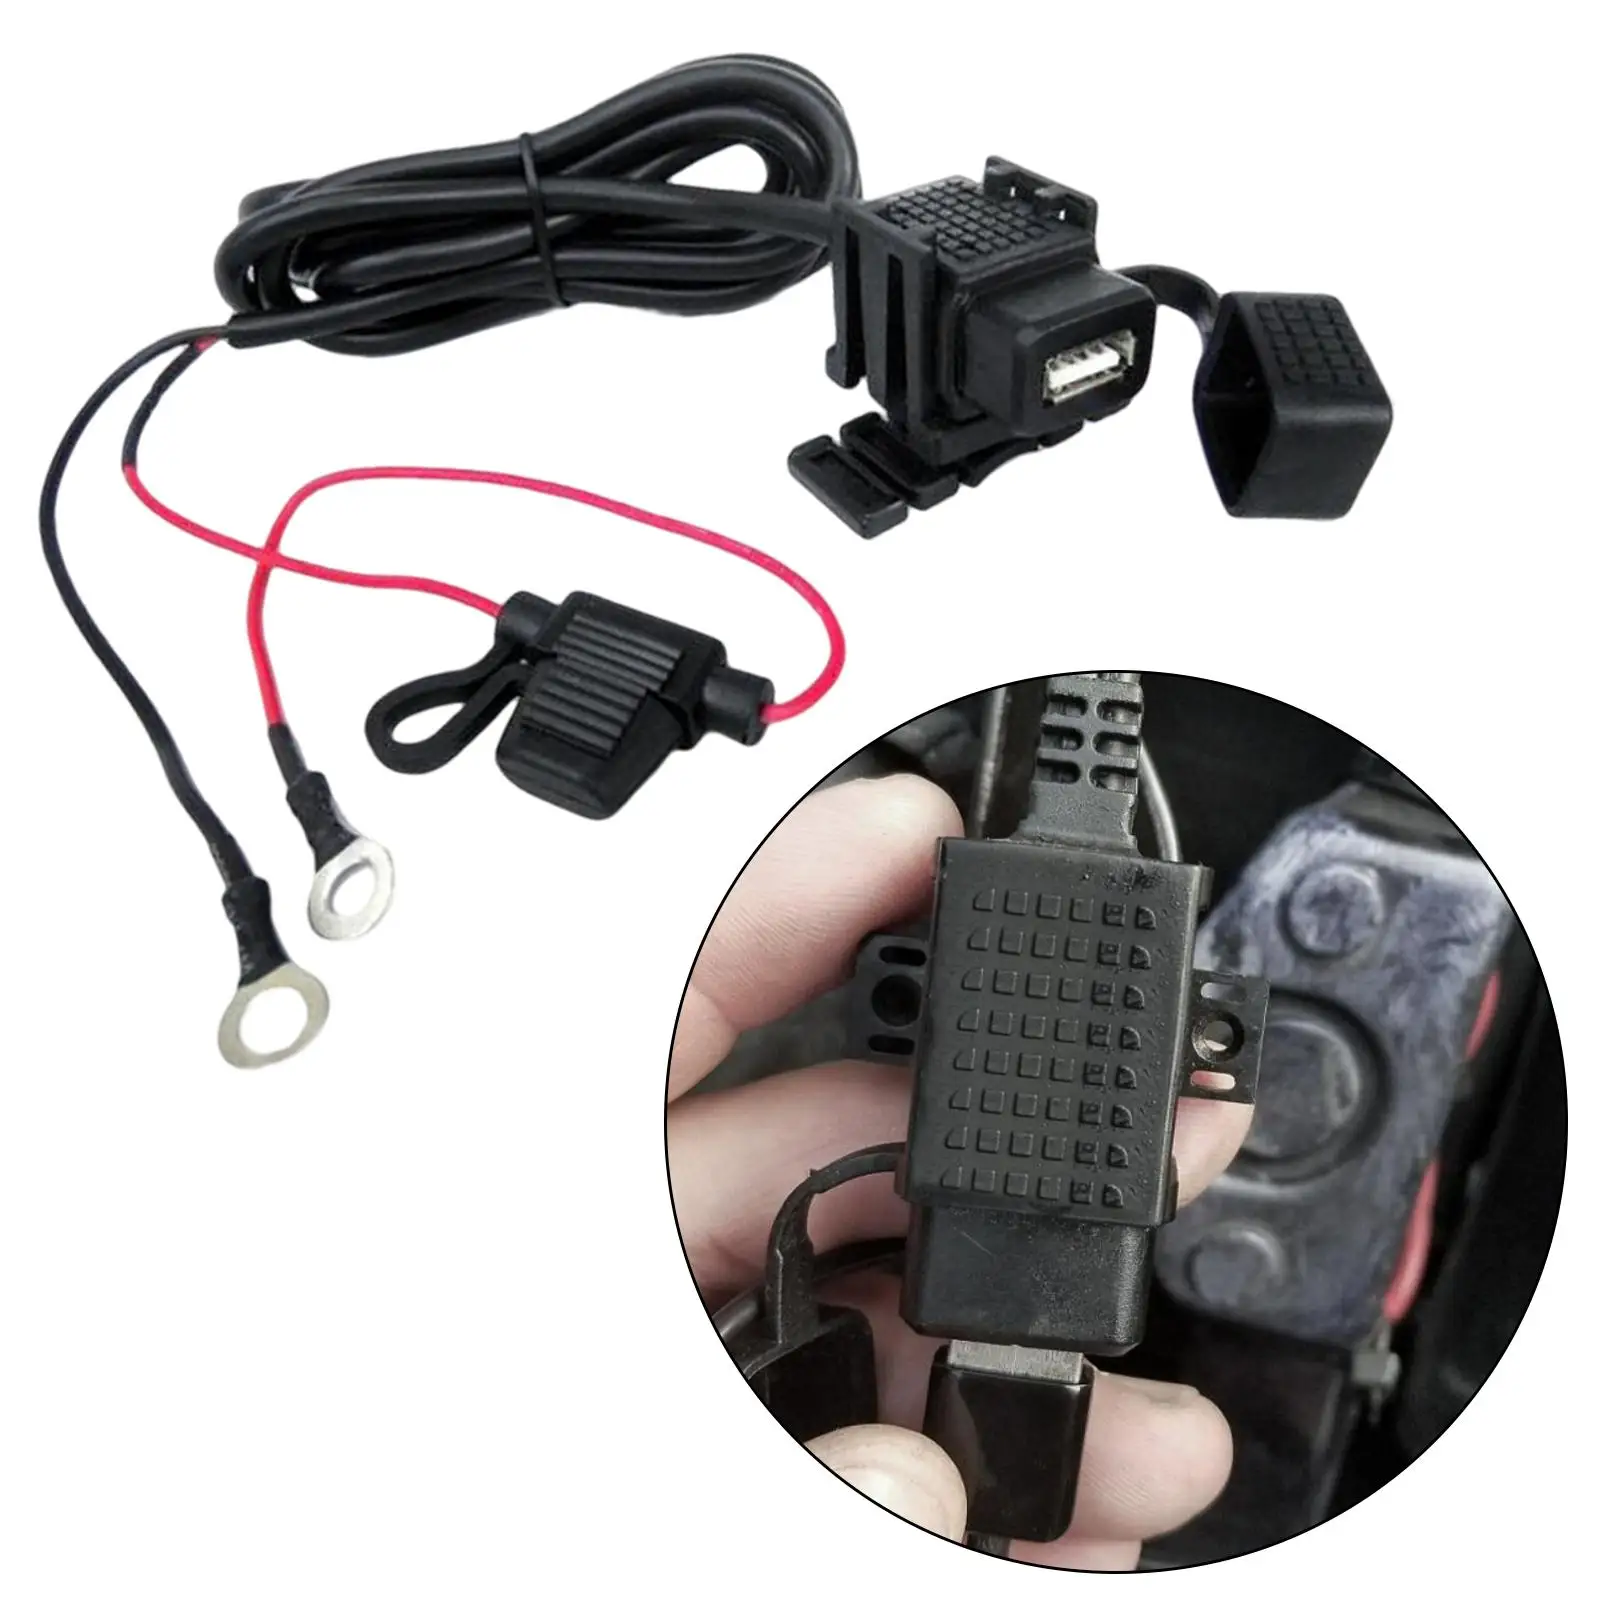 Motorcycle USB Phone Charger Adapter Cable, Waterproof USB Port, 12V-24V, for